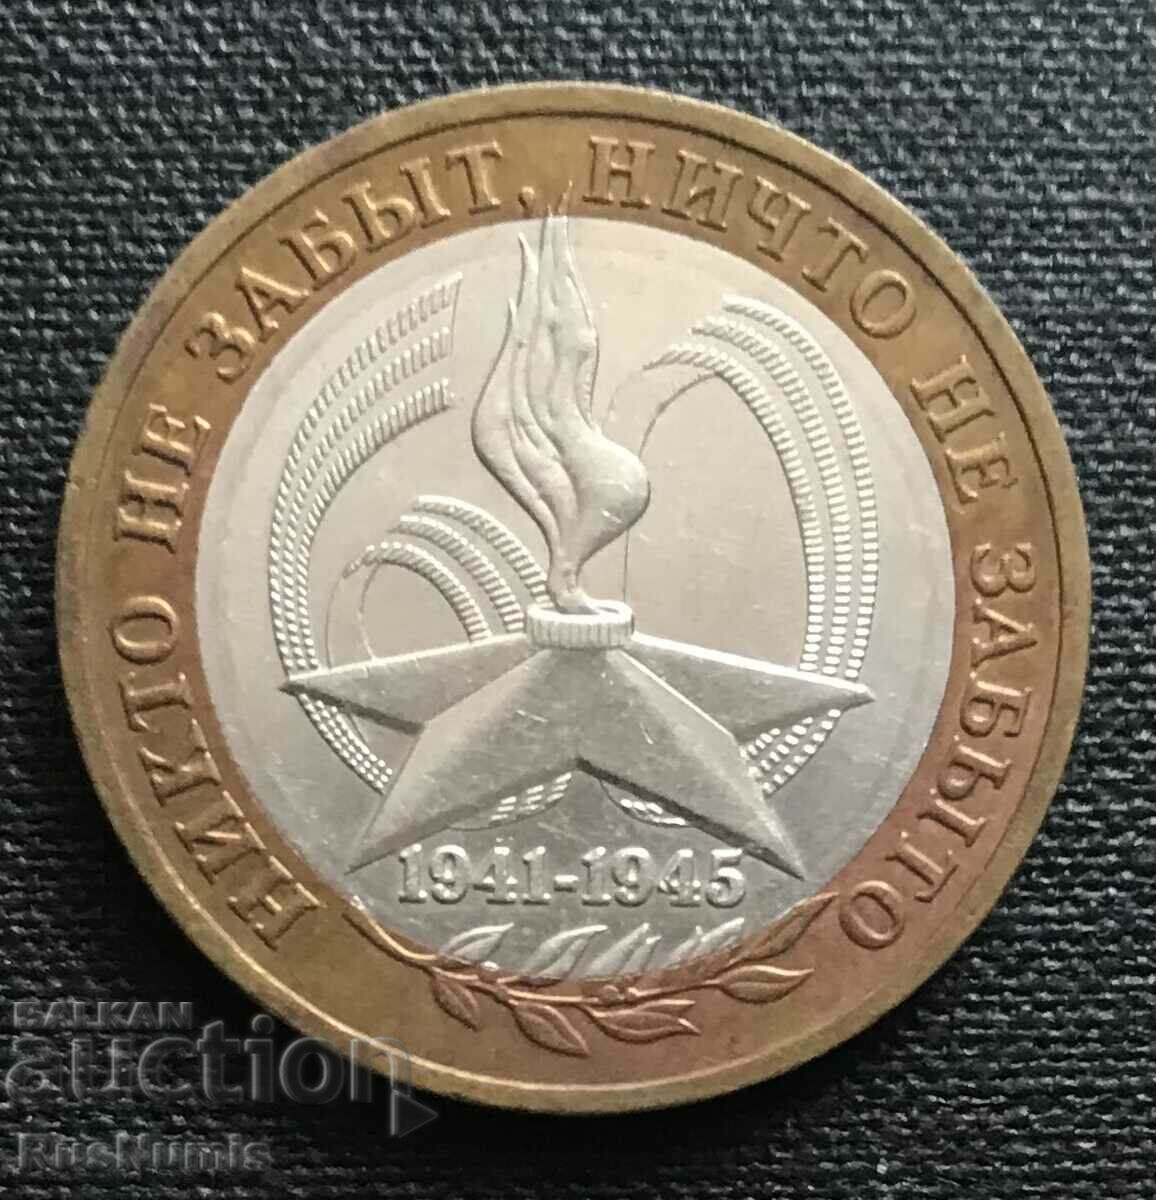 Russia. 10 rubles 2005 60 years since the victory.